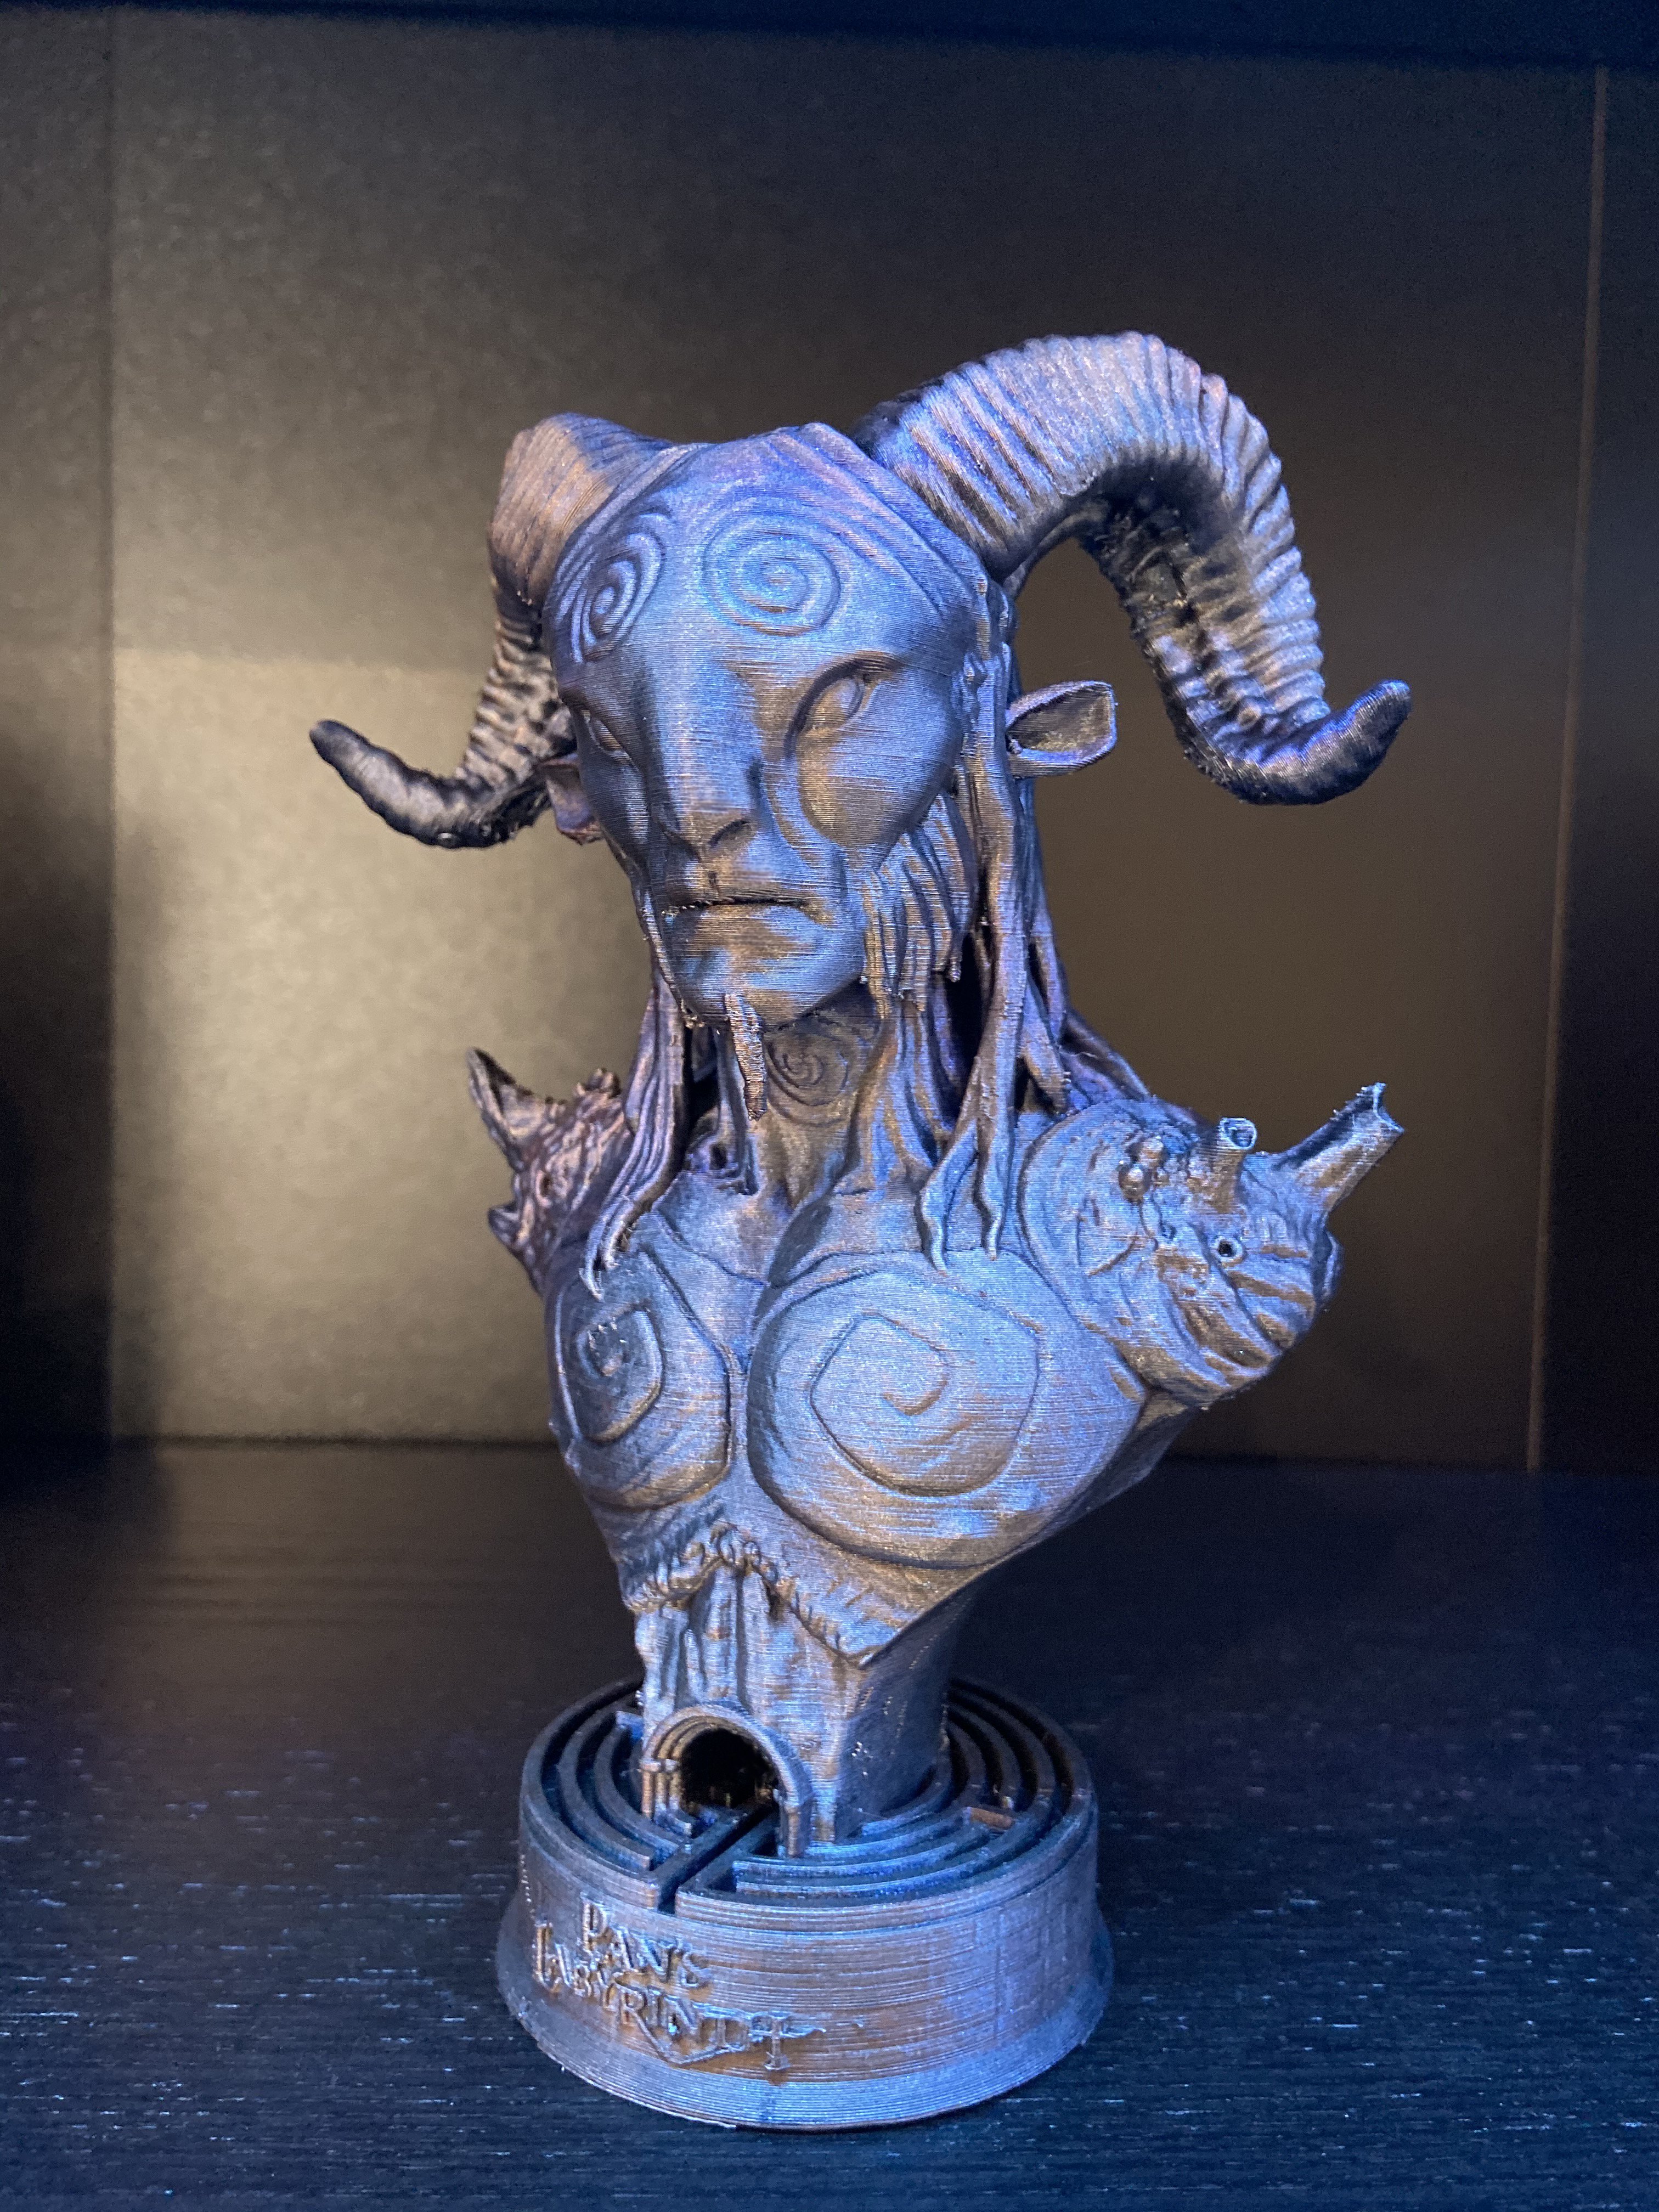 sæt ind Skadelig Nøjagtighed Fotis Mint on Twitter: "The Faun from Pan's Labyrinth is now available in  my Patreon page! 3D printed with @ZMorph3d VX and Voxelizer slicer tree  supports. #3Dprinting @RealGDT https://t.co/WcTeY8a5L0" / X